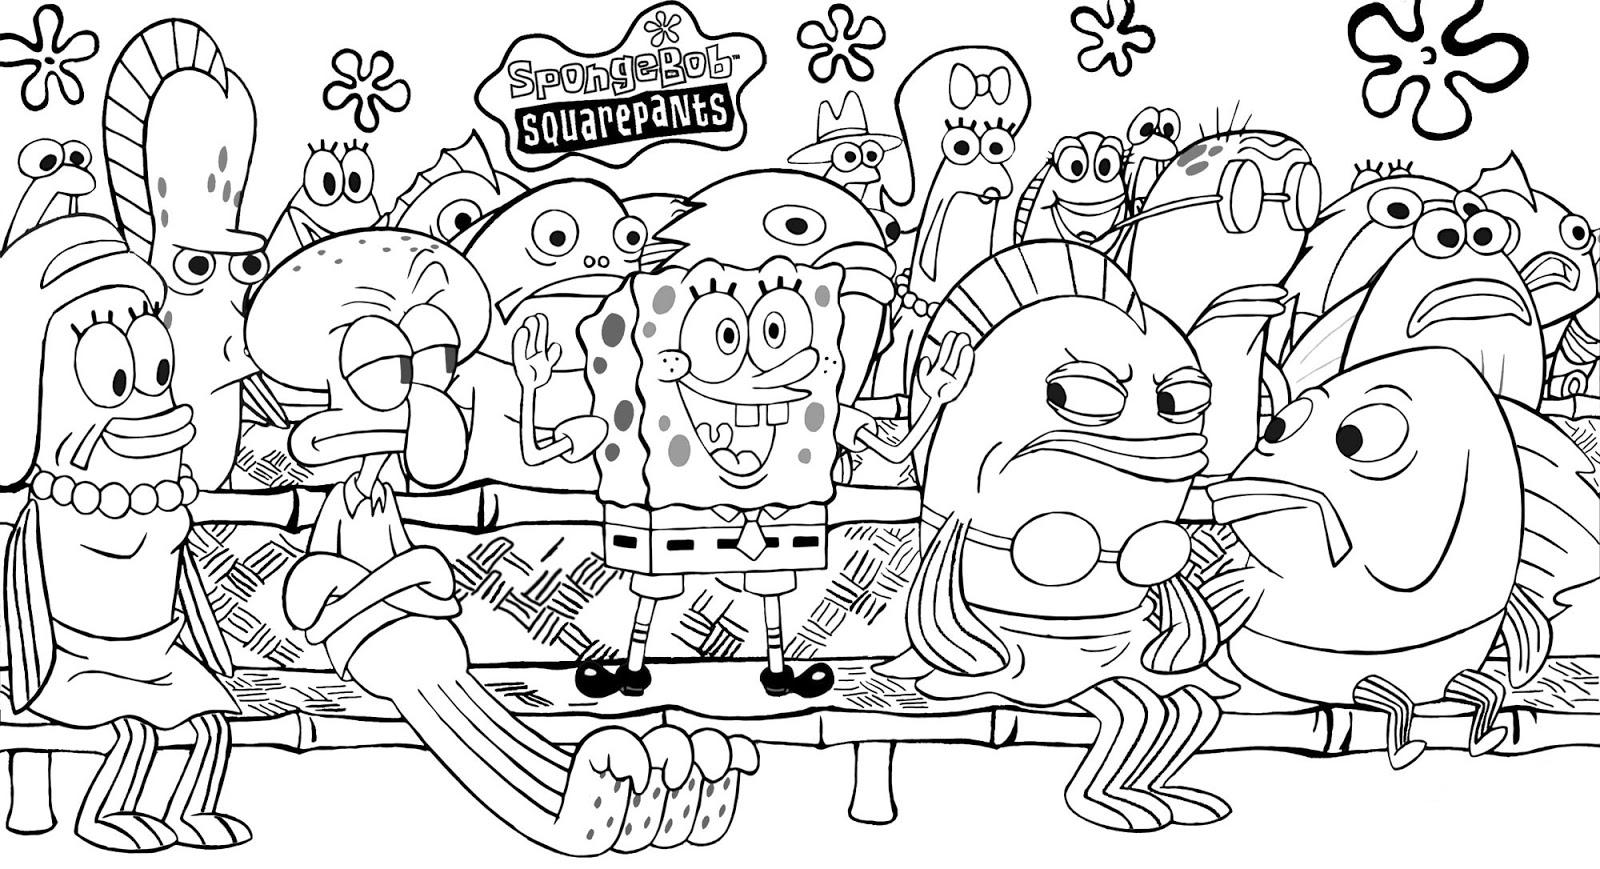 Take The Attention Spongebob S Free Coloring Page